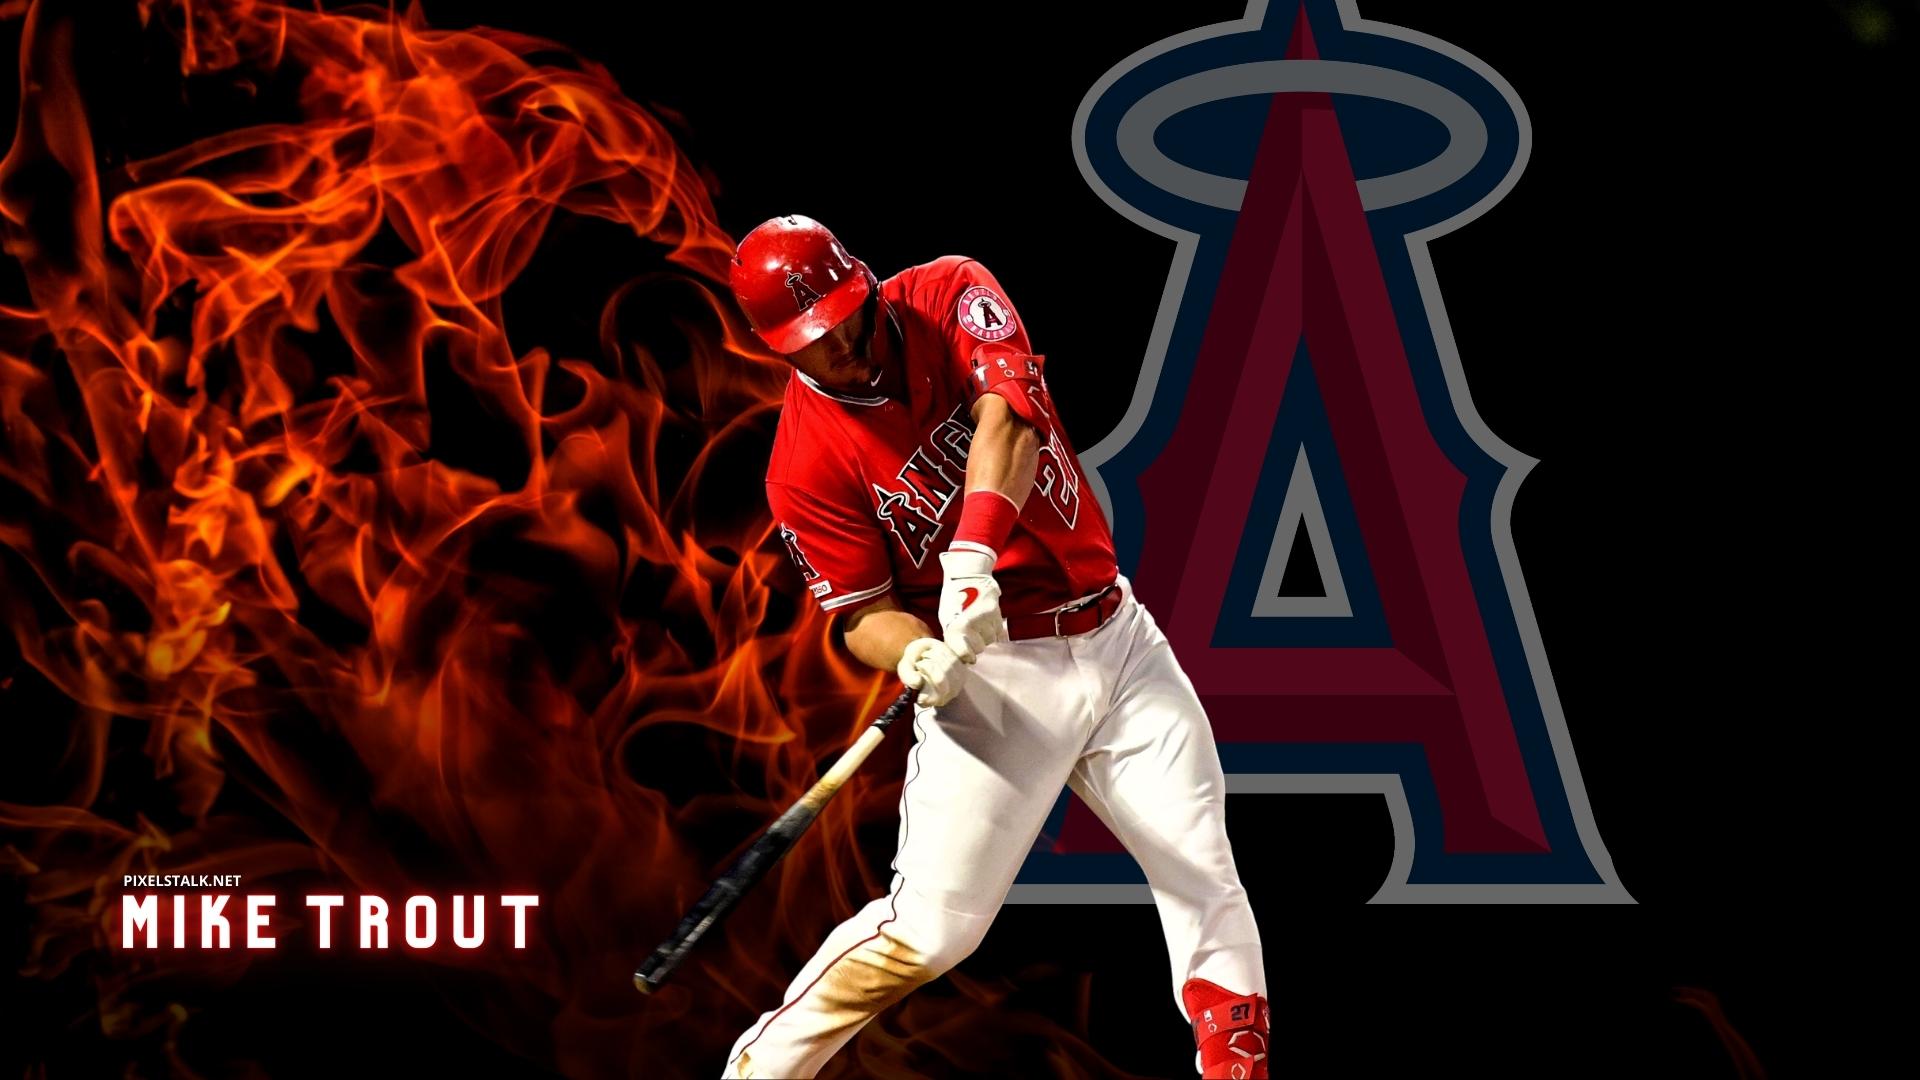 Los Angeles Angels on Twitter MikeTrouts ready for a game of catch  Grab your glove and download this new wallpaper for your phone  httpstcoW4ko7fUKDU httpstcoso1pOitRoo  Twitter